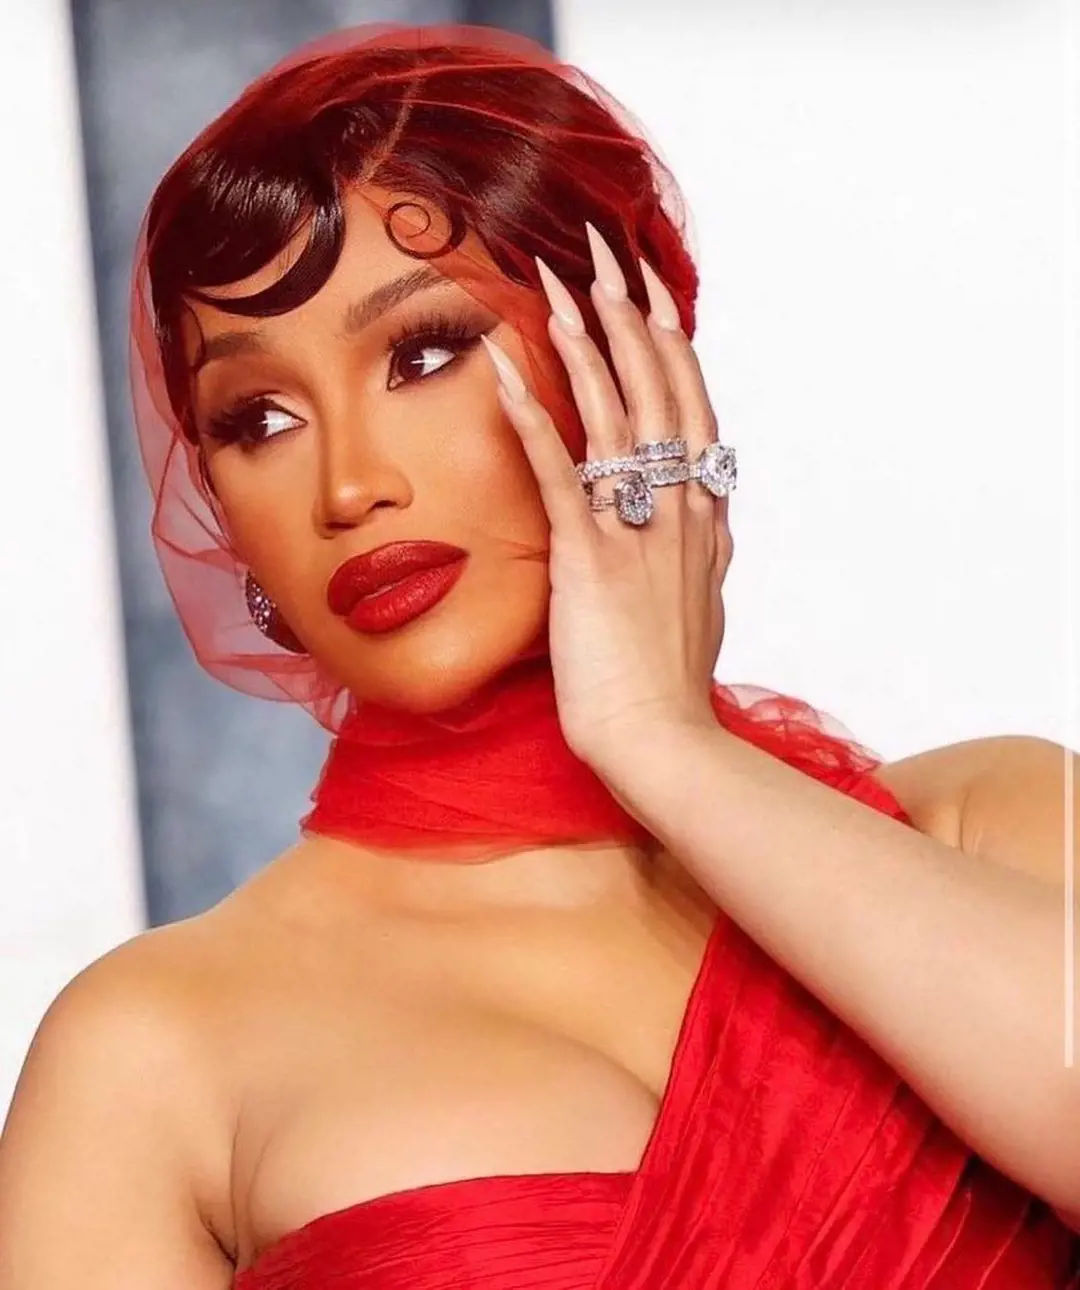 Cardi B received a Grammy Award for her debut album 'Invasion of Privacy' in 2018.